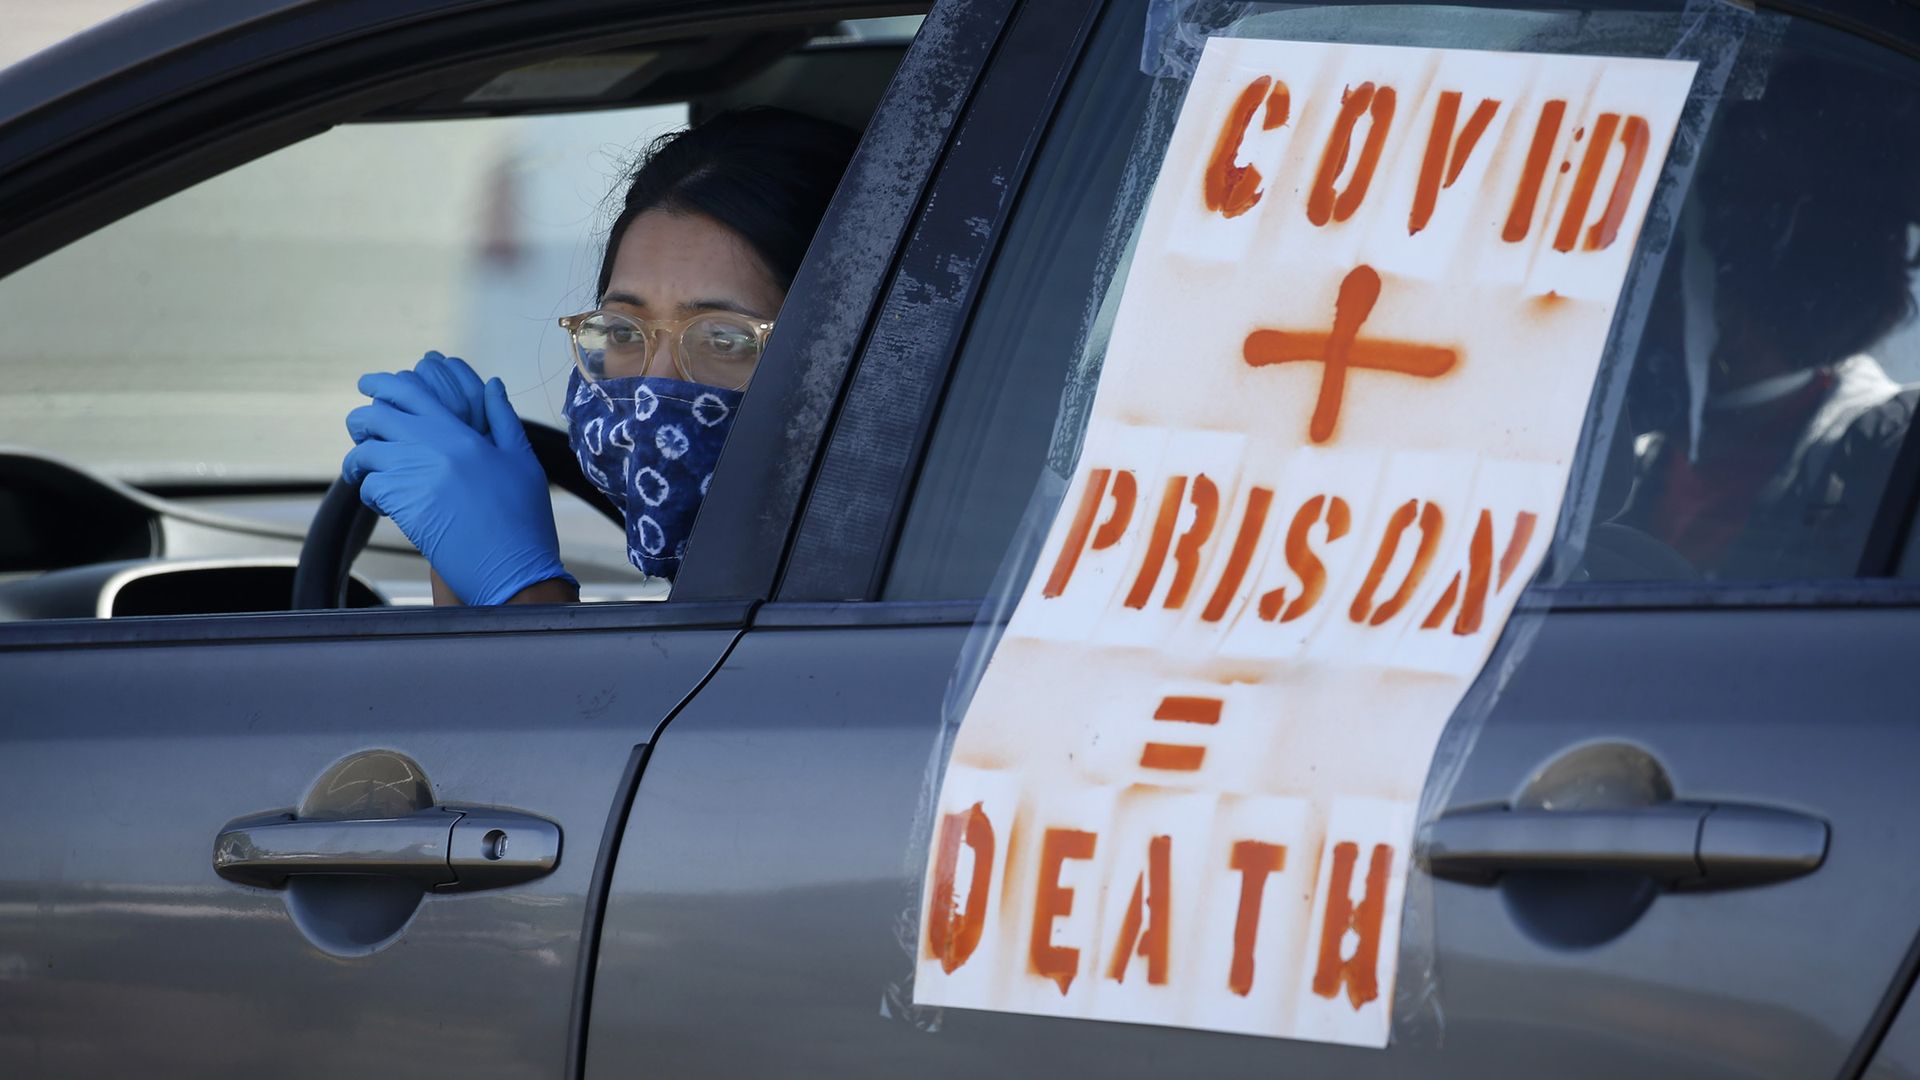 A demonstrator waits in her car with a poster that says "COVID + Prison = Death"